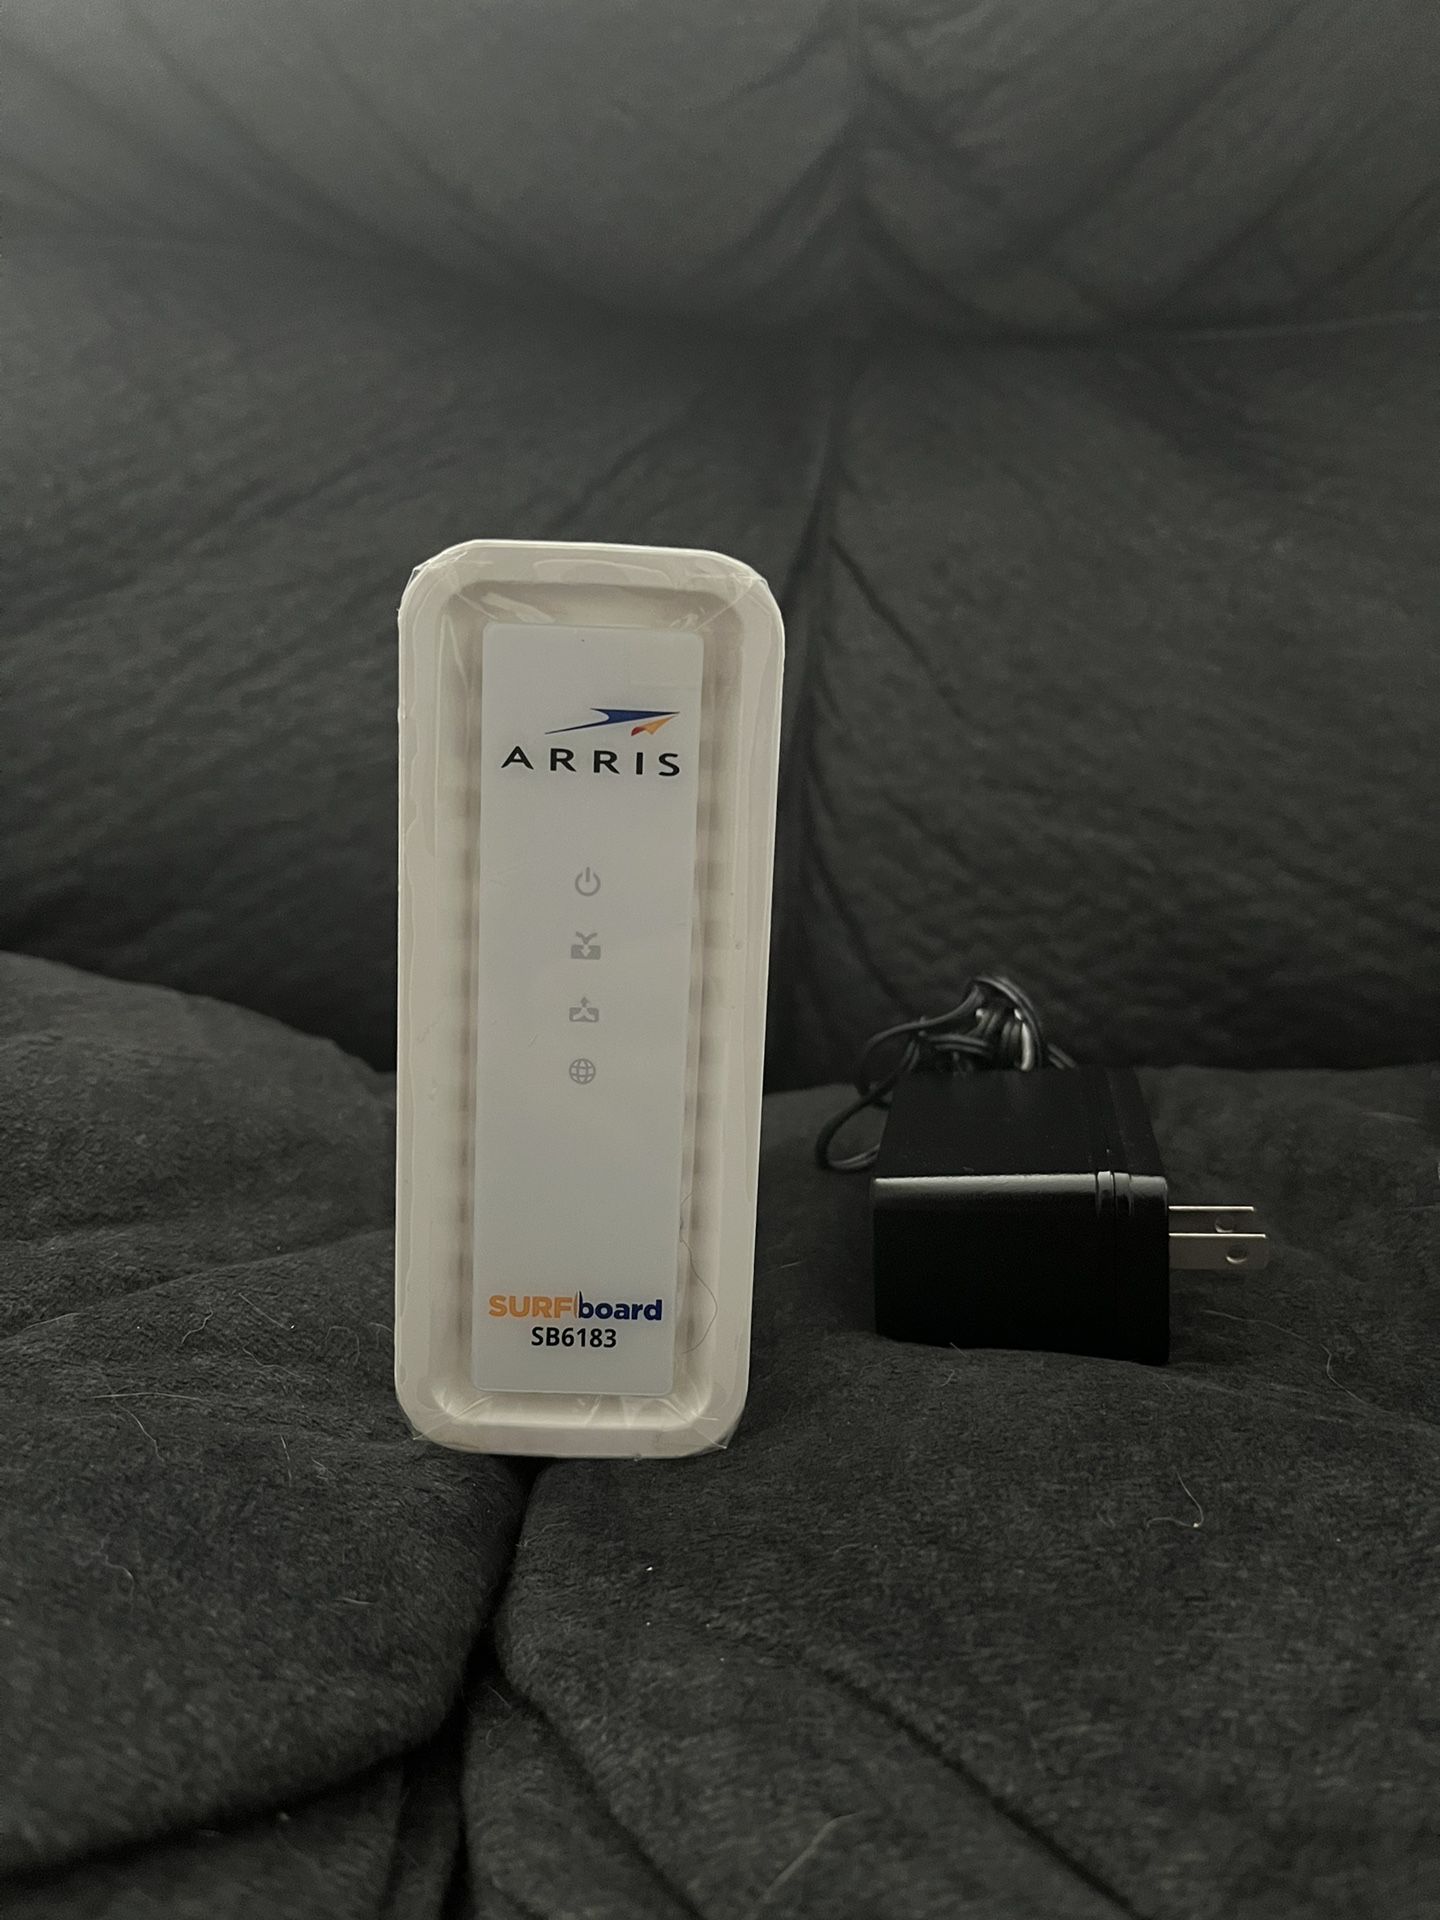 Arris Modem Works With Comcast & AT&T